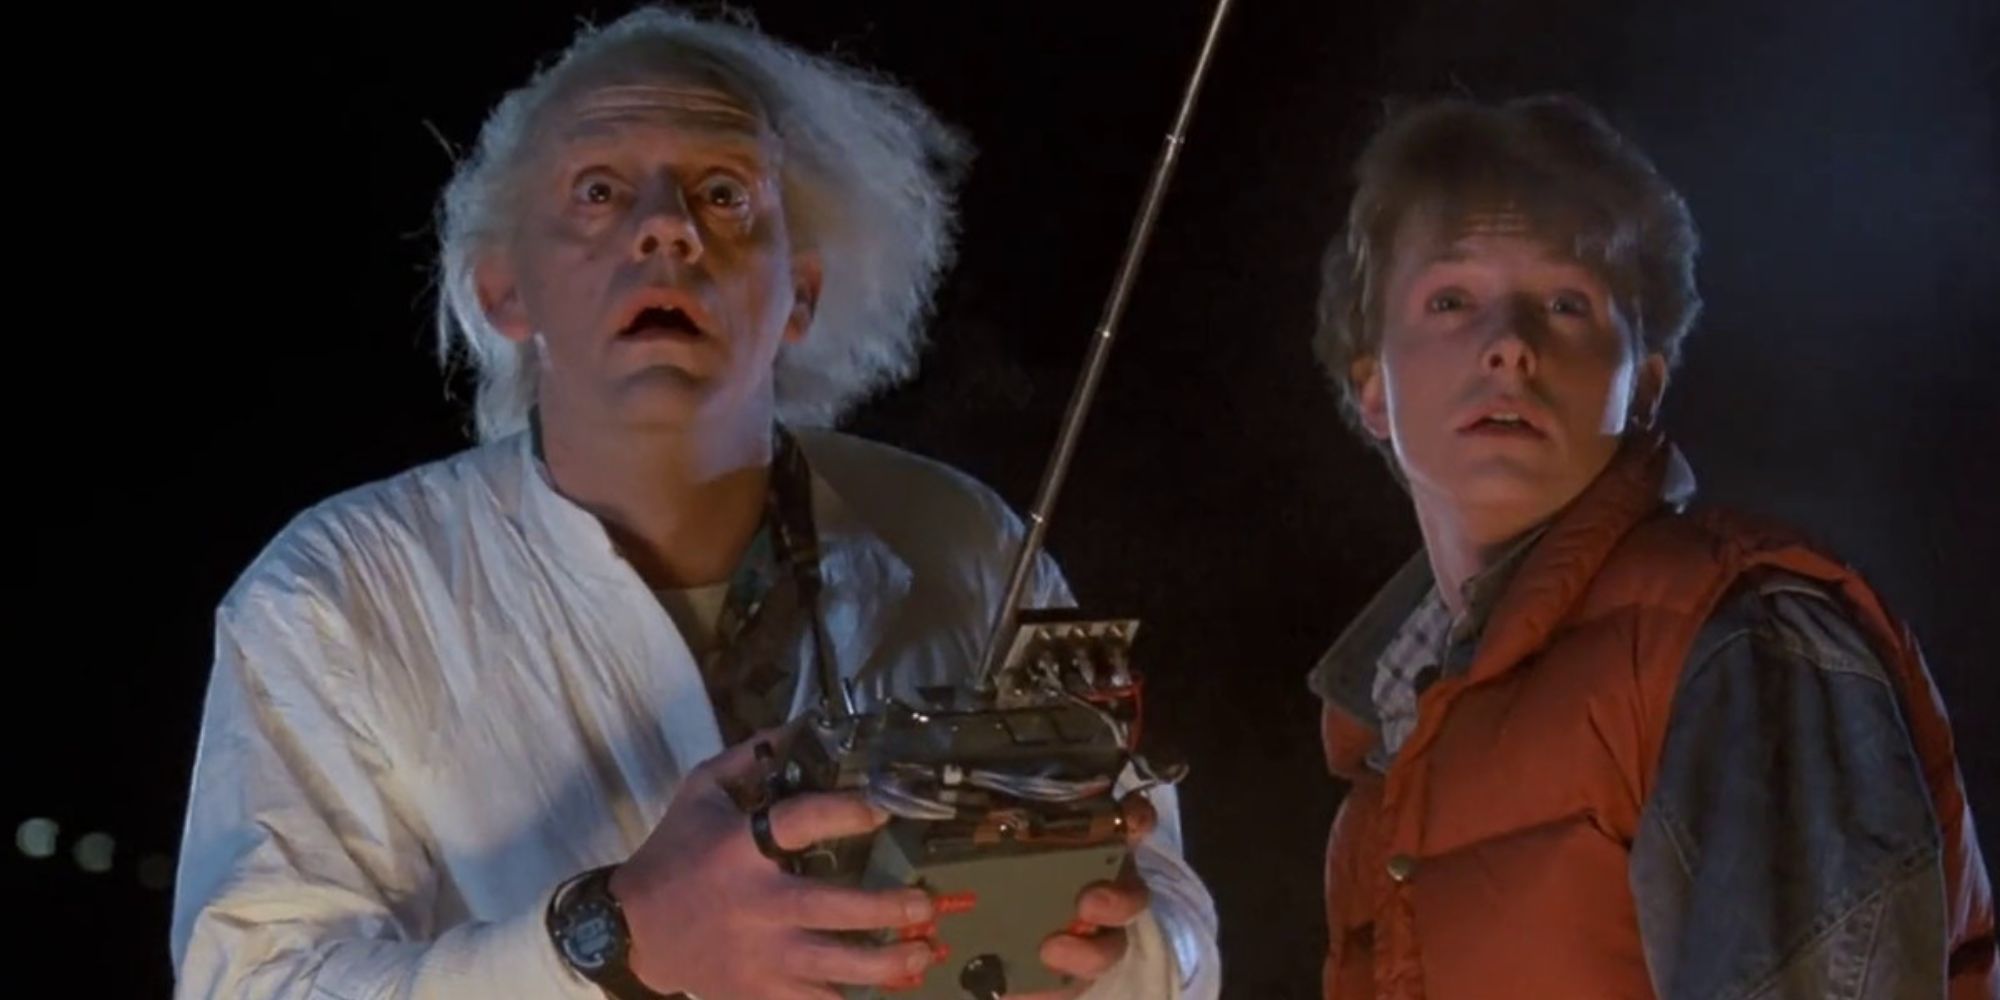 Dr. Brown (Christopher Lloyd) and Marty McFly (Michael J. Fox) in Back to the Future